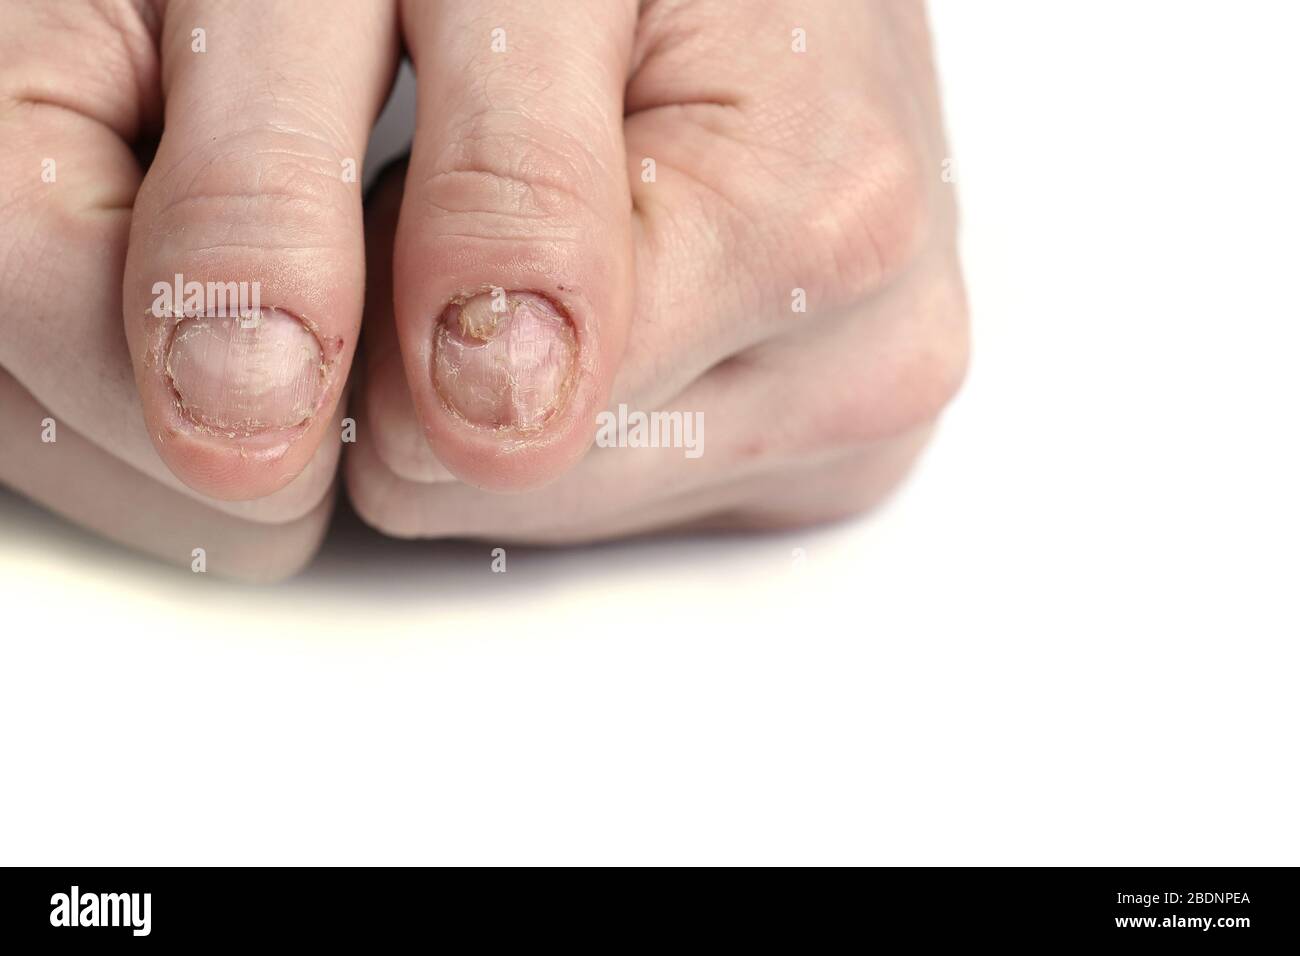 Fungus Infection on Nails Hand, Finger with onychomycosis, A toenail fungus.  - soft focus Stock Photo by ©n.nonthamand.gmail.com 120823986